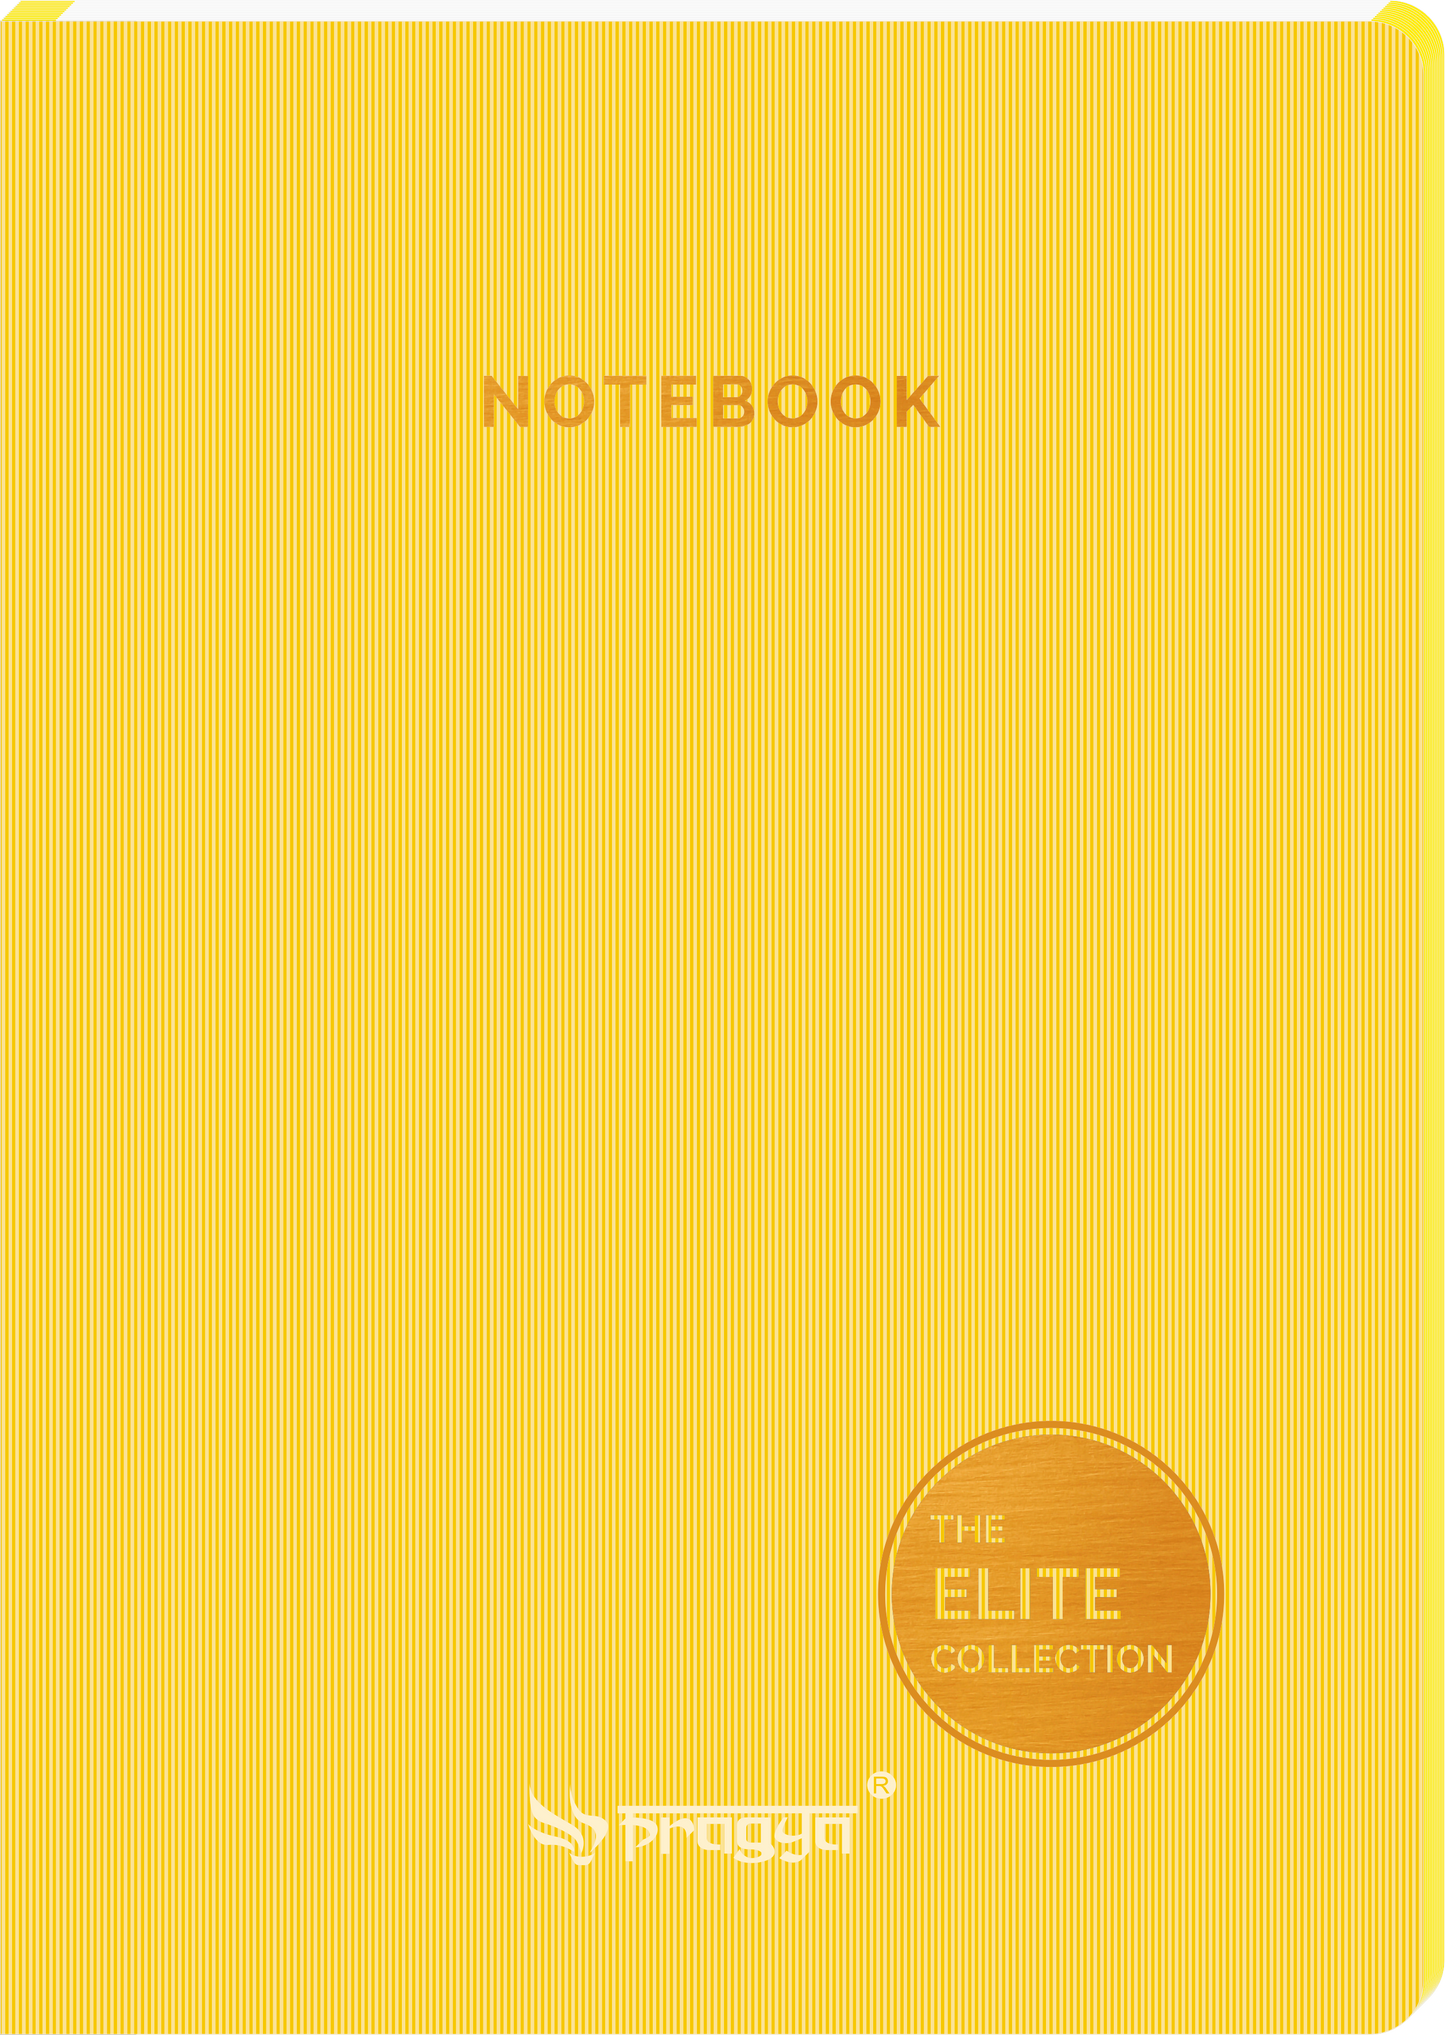 Pragya A4 Notebook(160 Pages, Ruled/Plain) Elite Collection Thread Sewn Colour Coded | Pack of 3